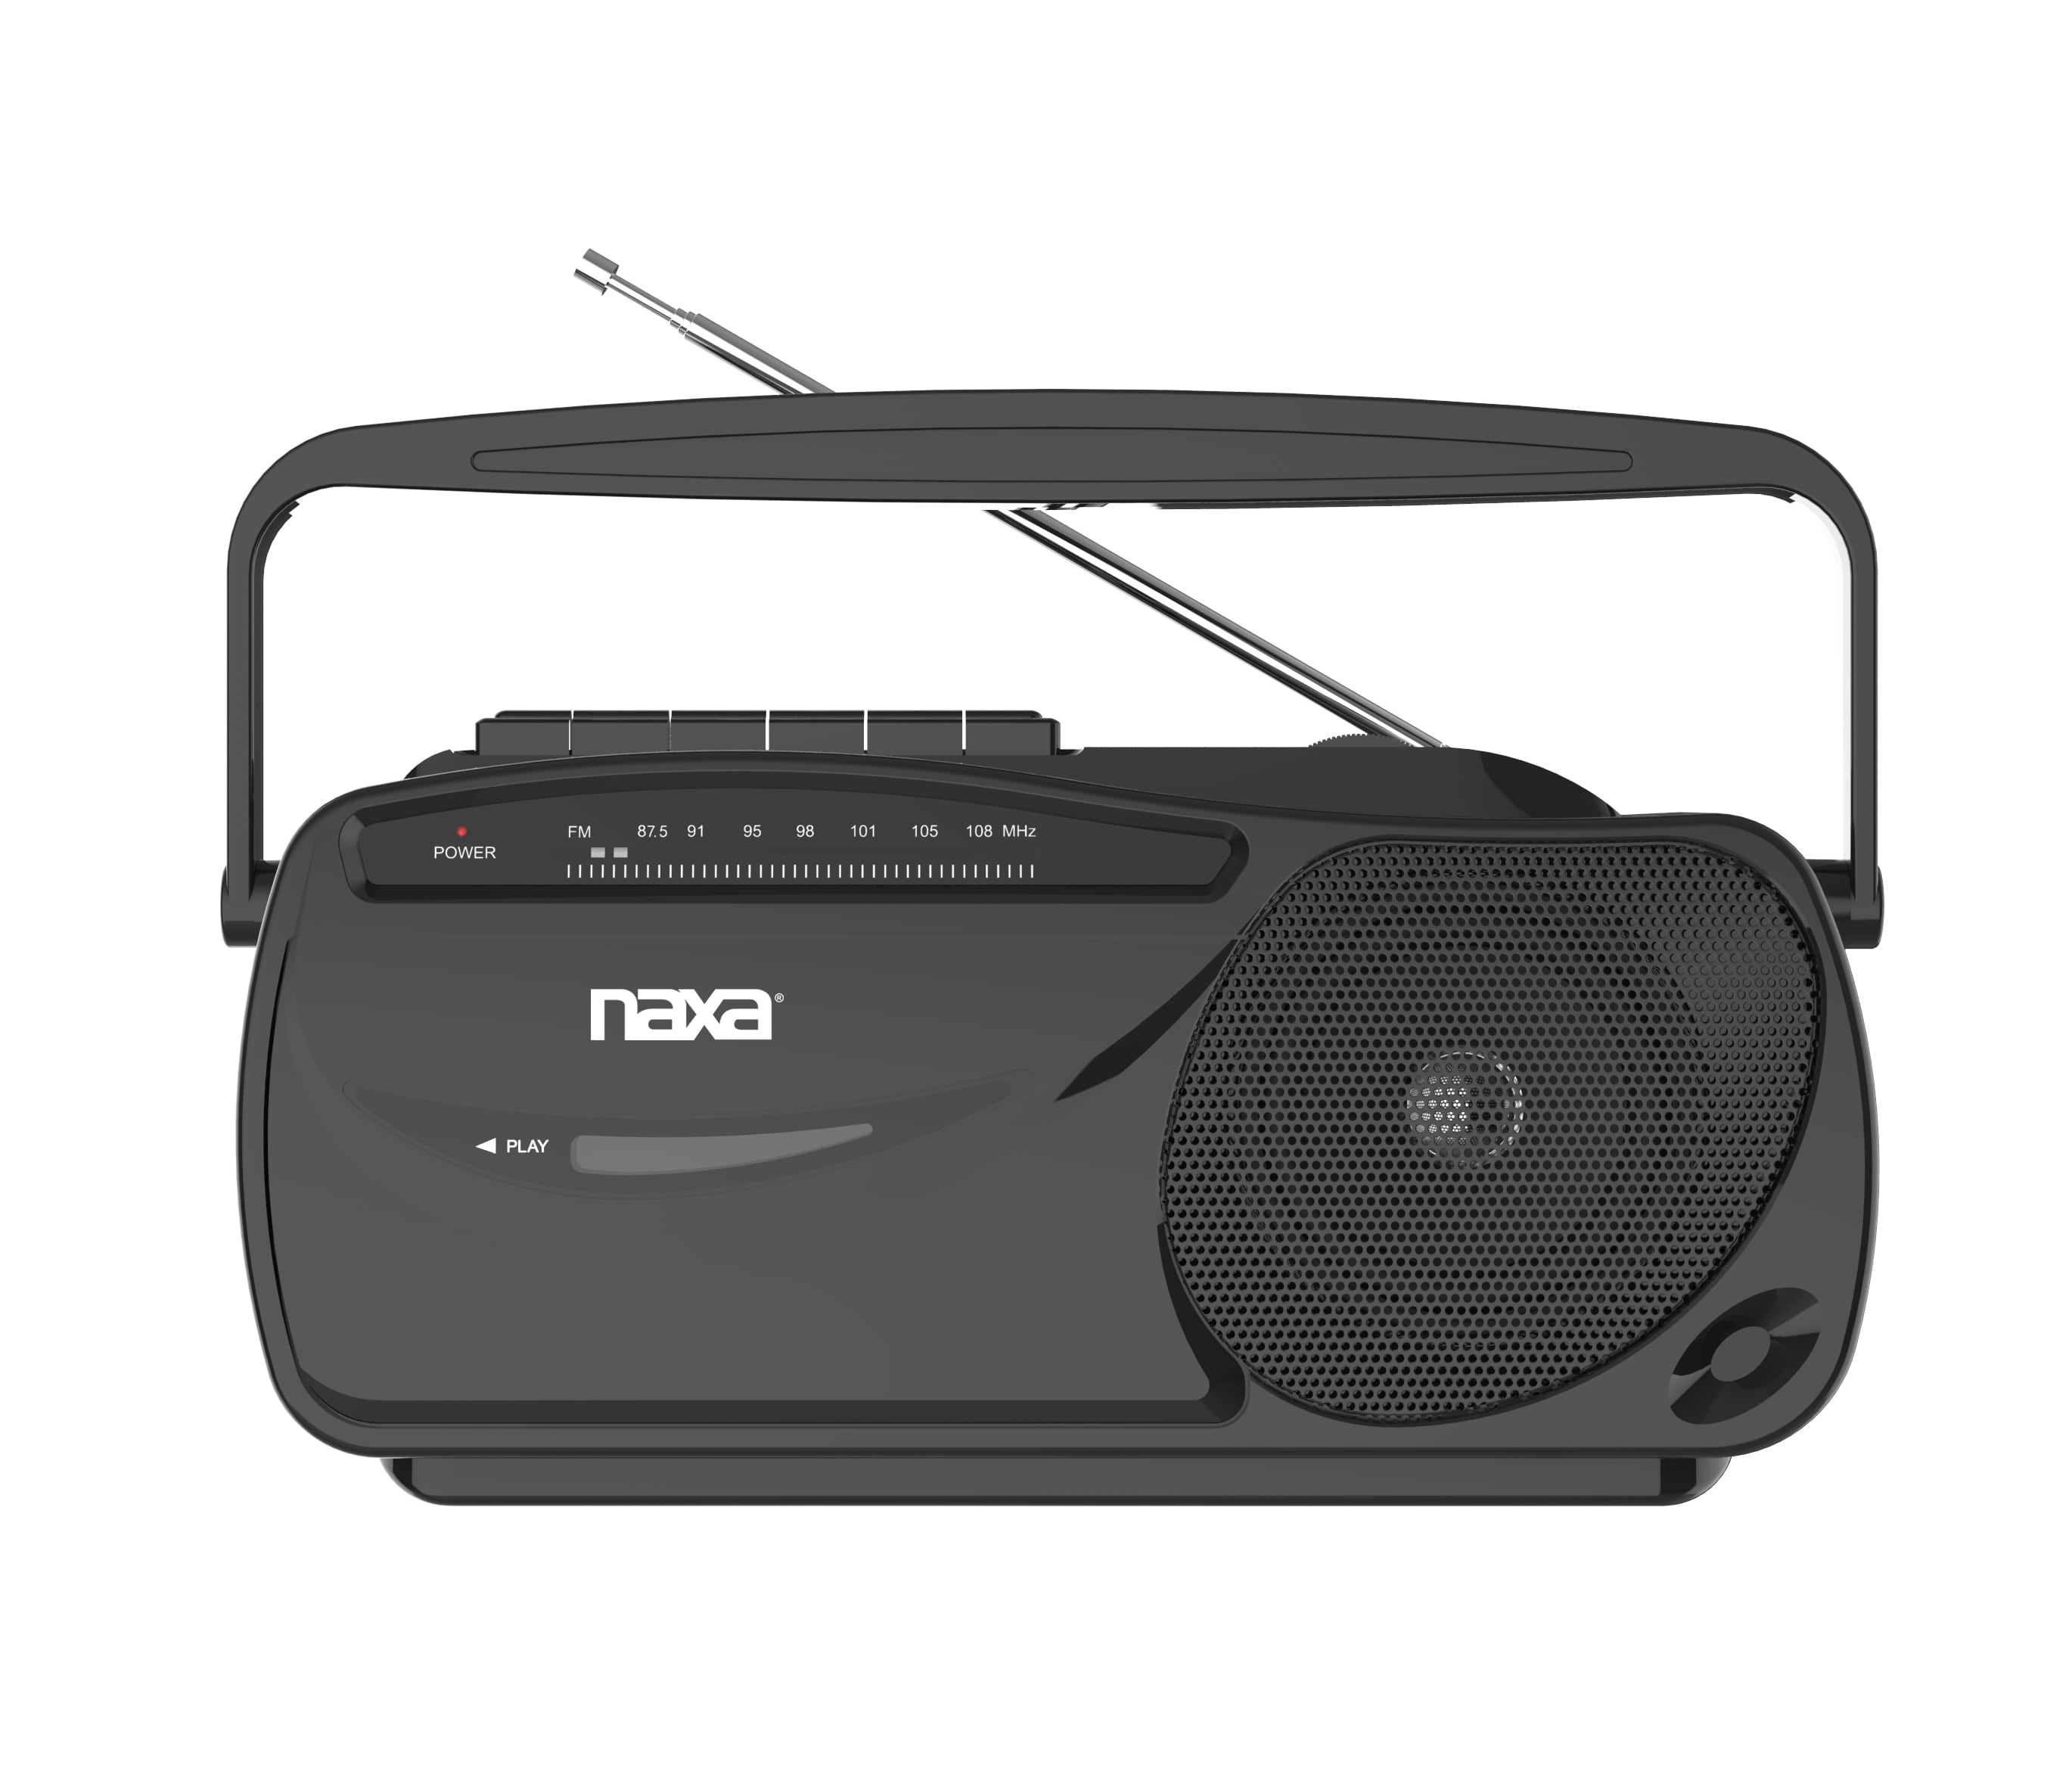 Panasonic AM/FM AC/DC Portable Radio - Metallic Chrome - Built-In Speakers  - Analog Display - Portable Boombox - Ideal for On-The-Go Listening